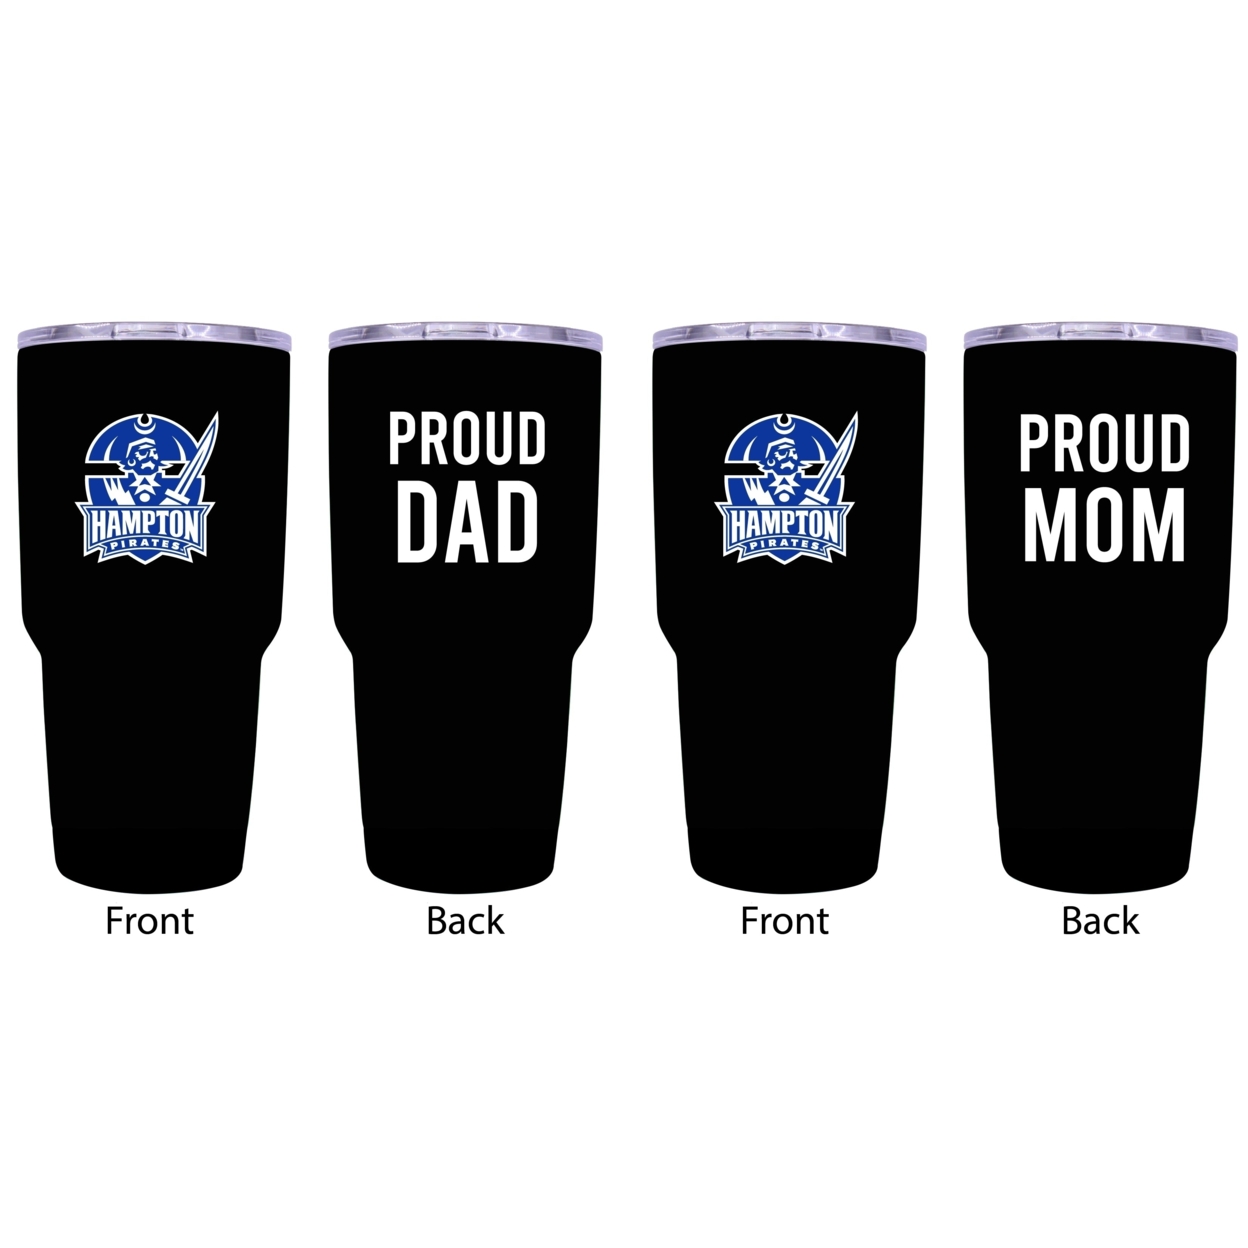 Hampton University Proud Mom And Dad 24 Oz Insulated Stainless Steel Tumblers 2 Pack Black.